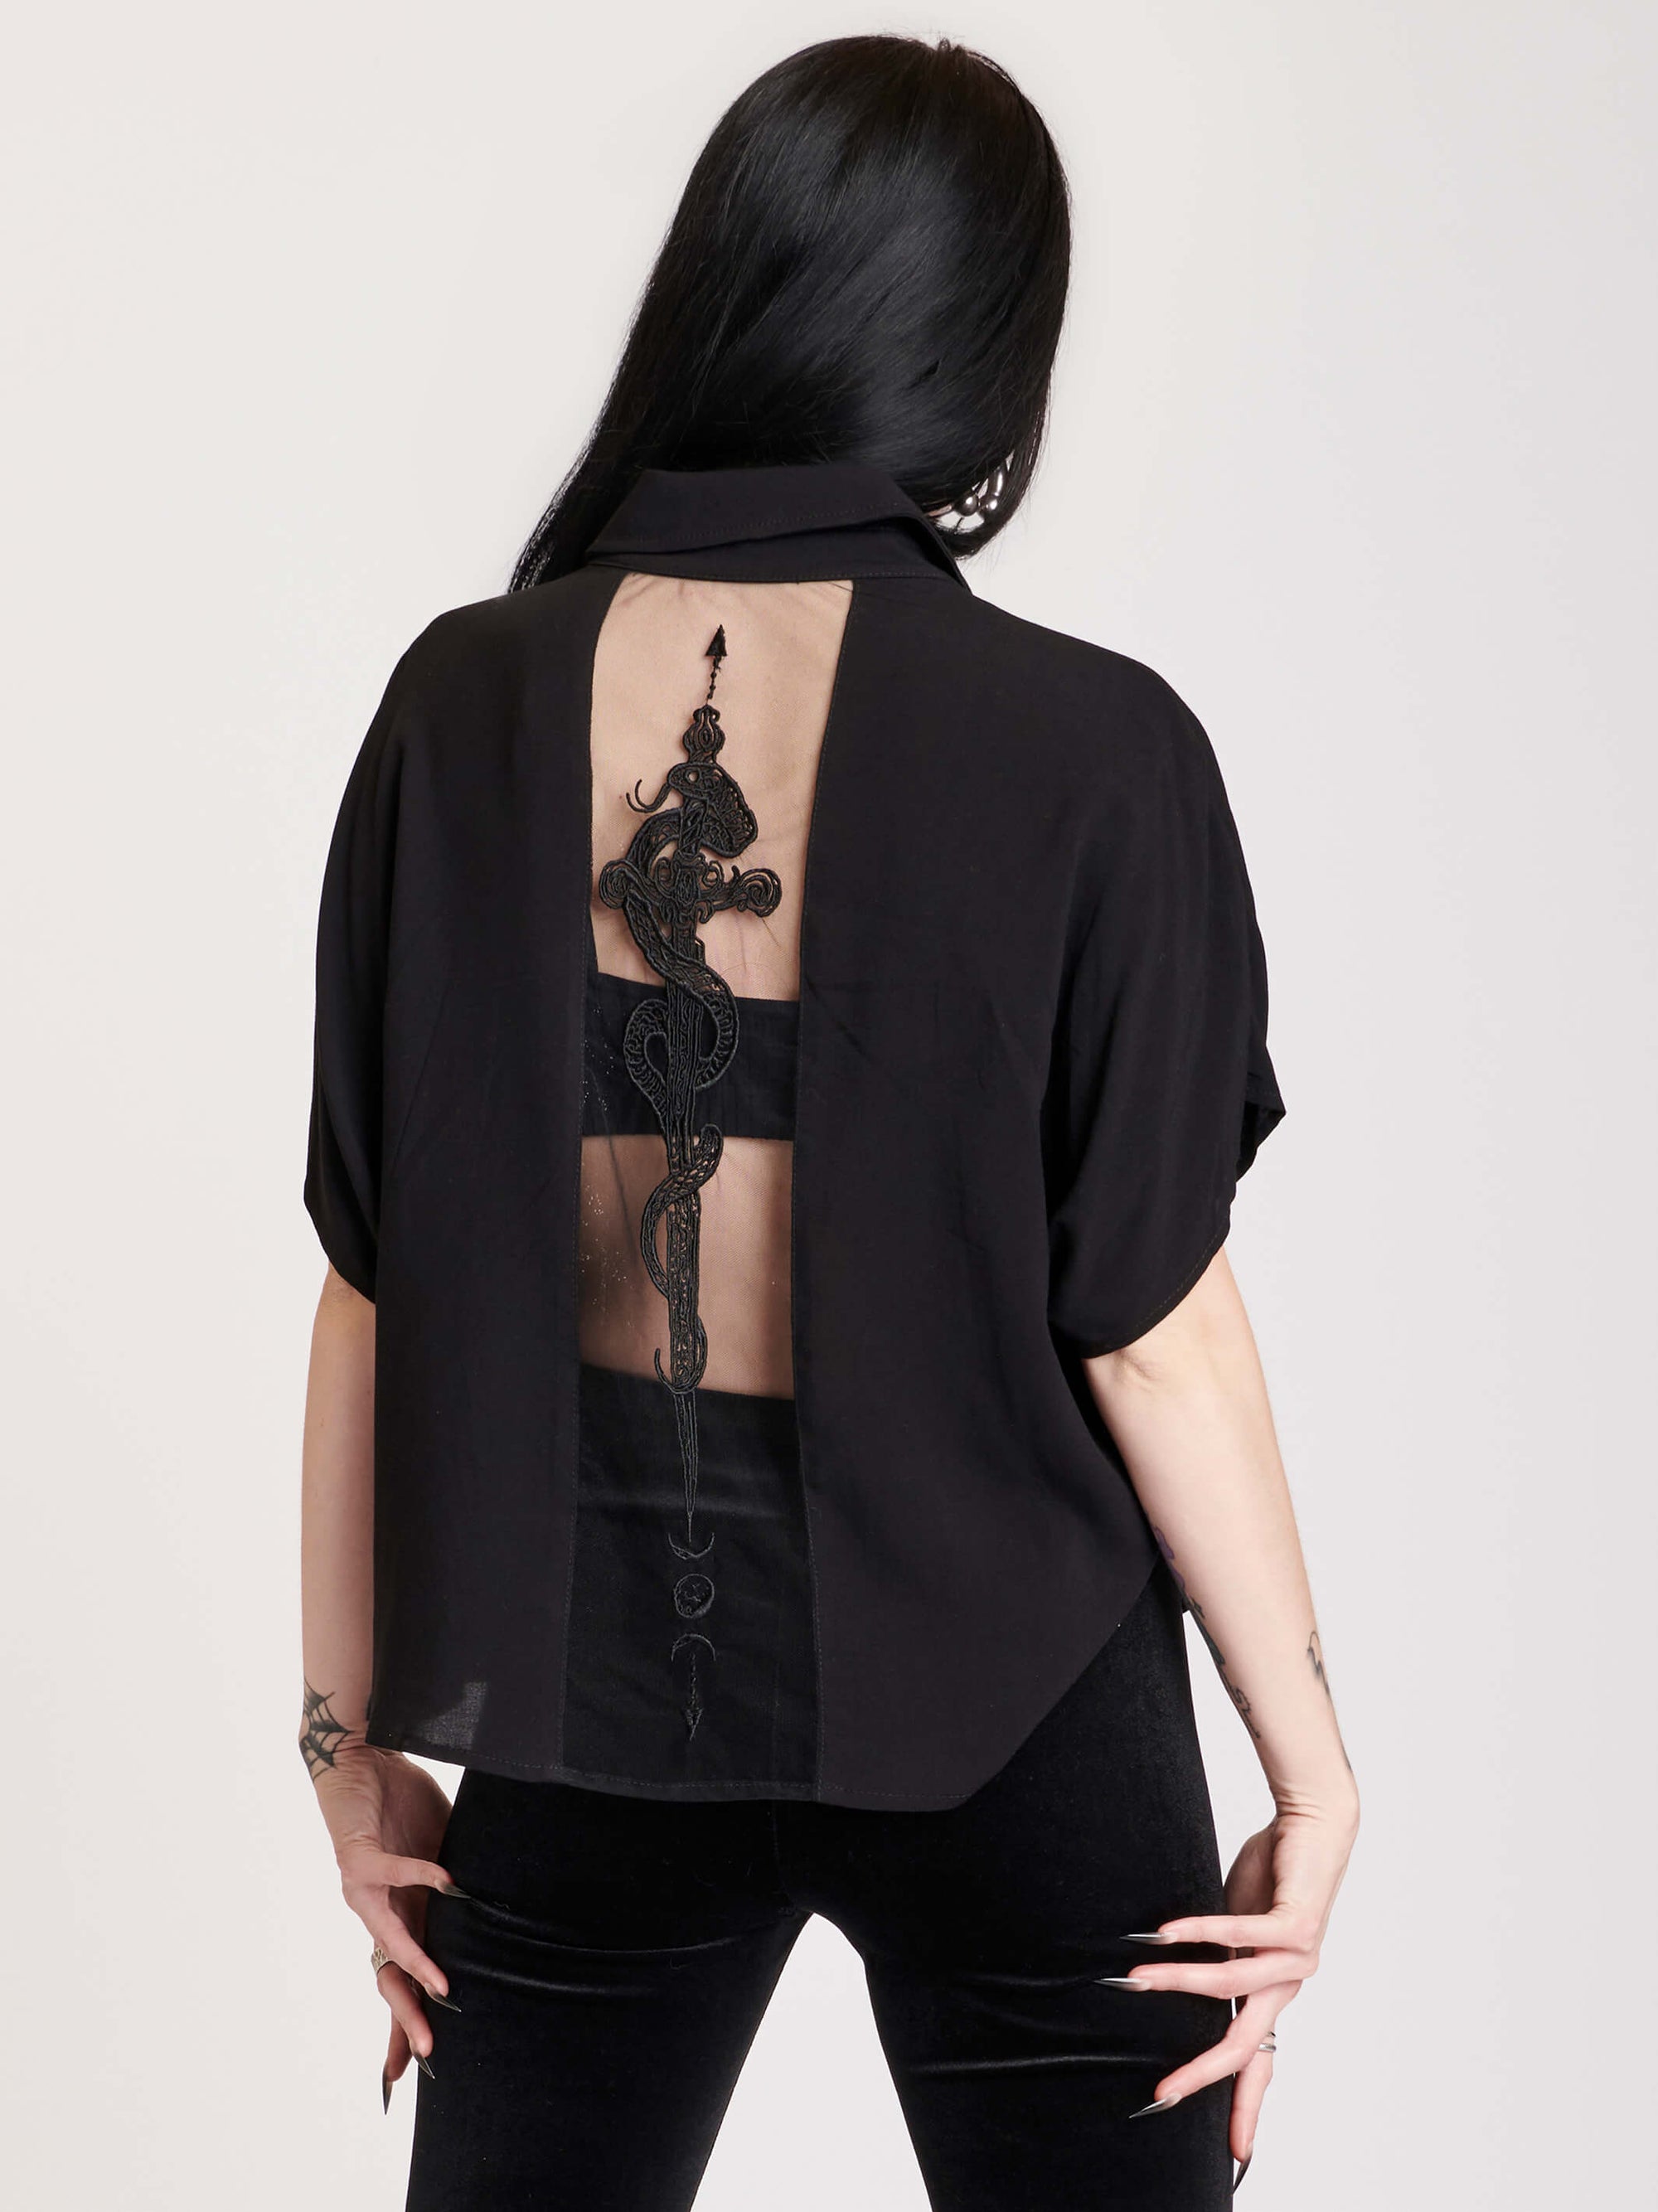 black button up shirt with embroidered back mesh panel,